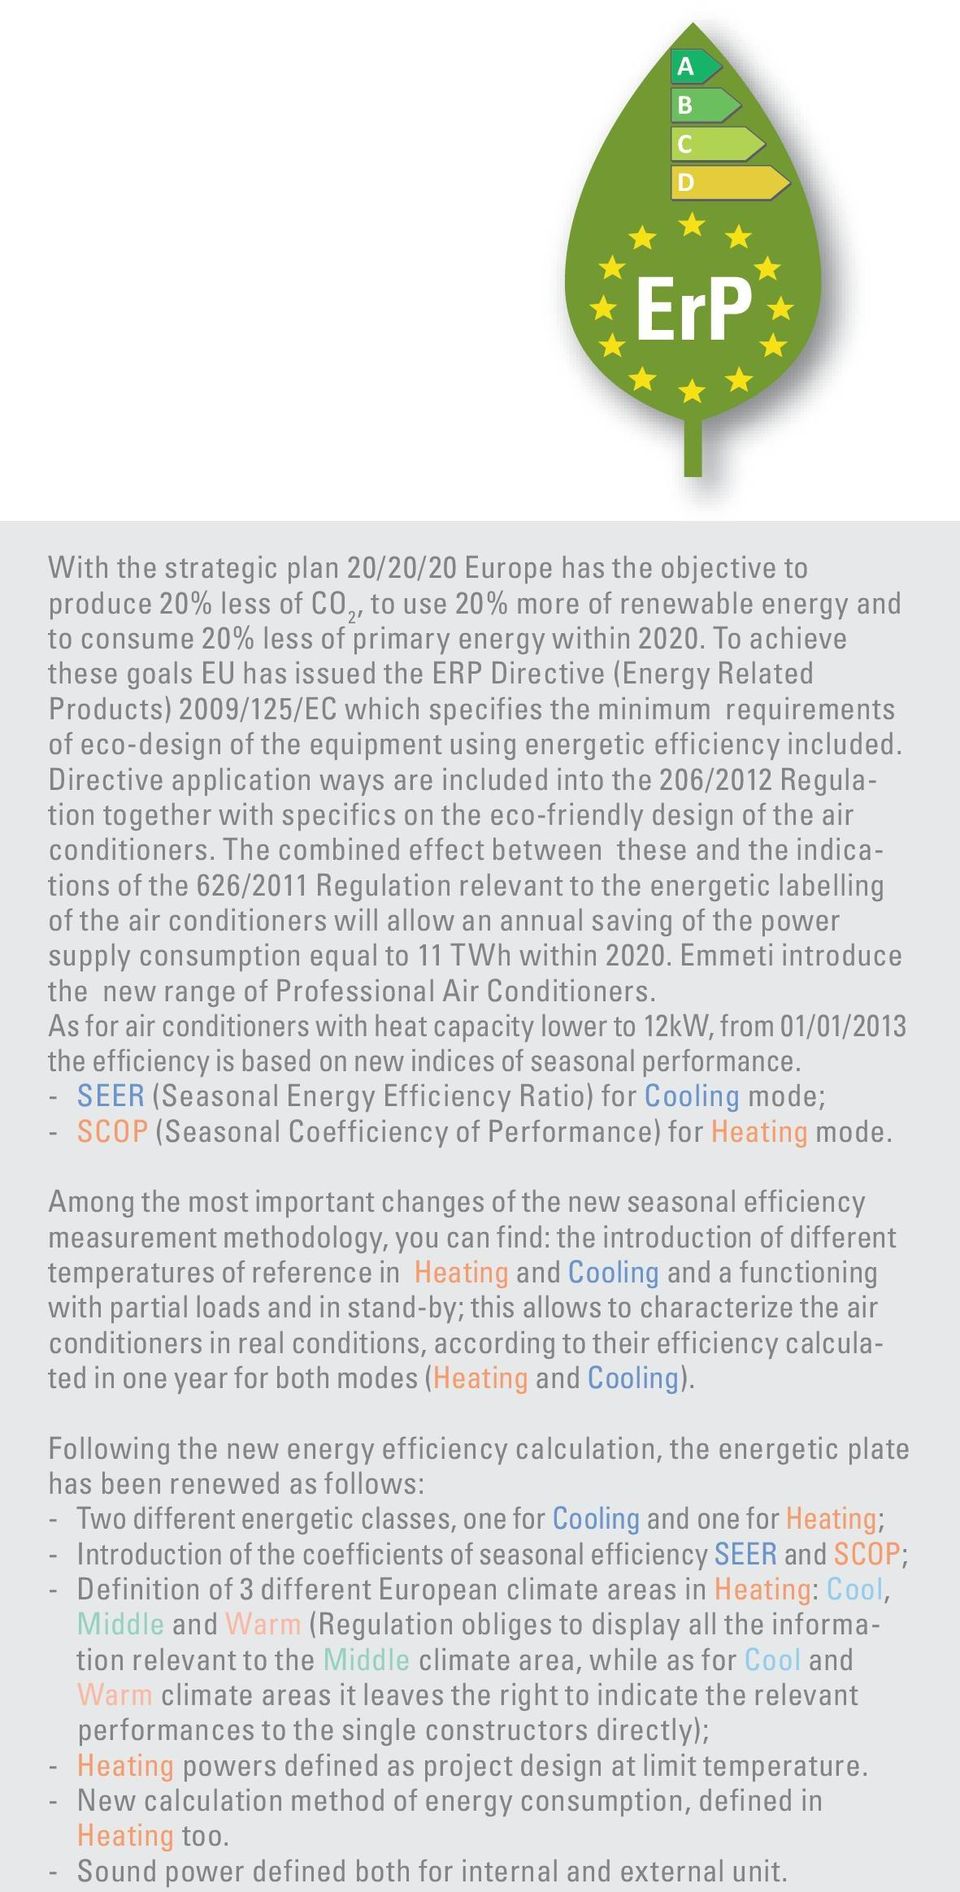 included. Directive application ways are included into the 206/2012 Regulation together with specifics on the eco-friendly design of the air conditioners.